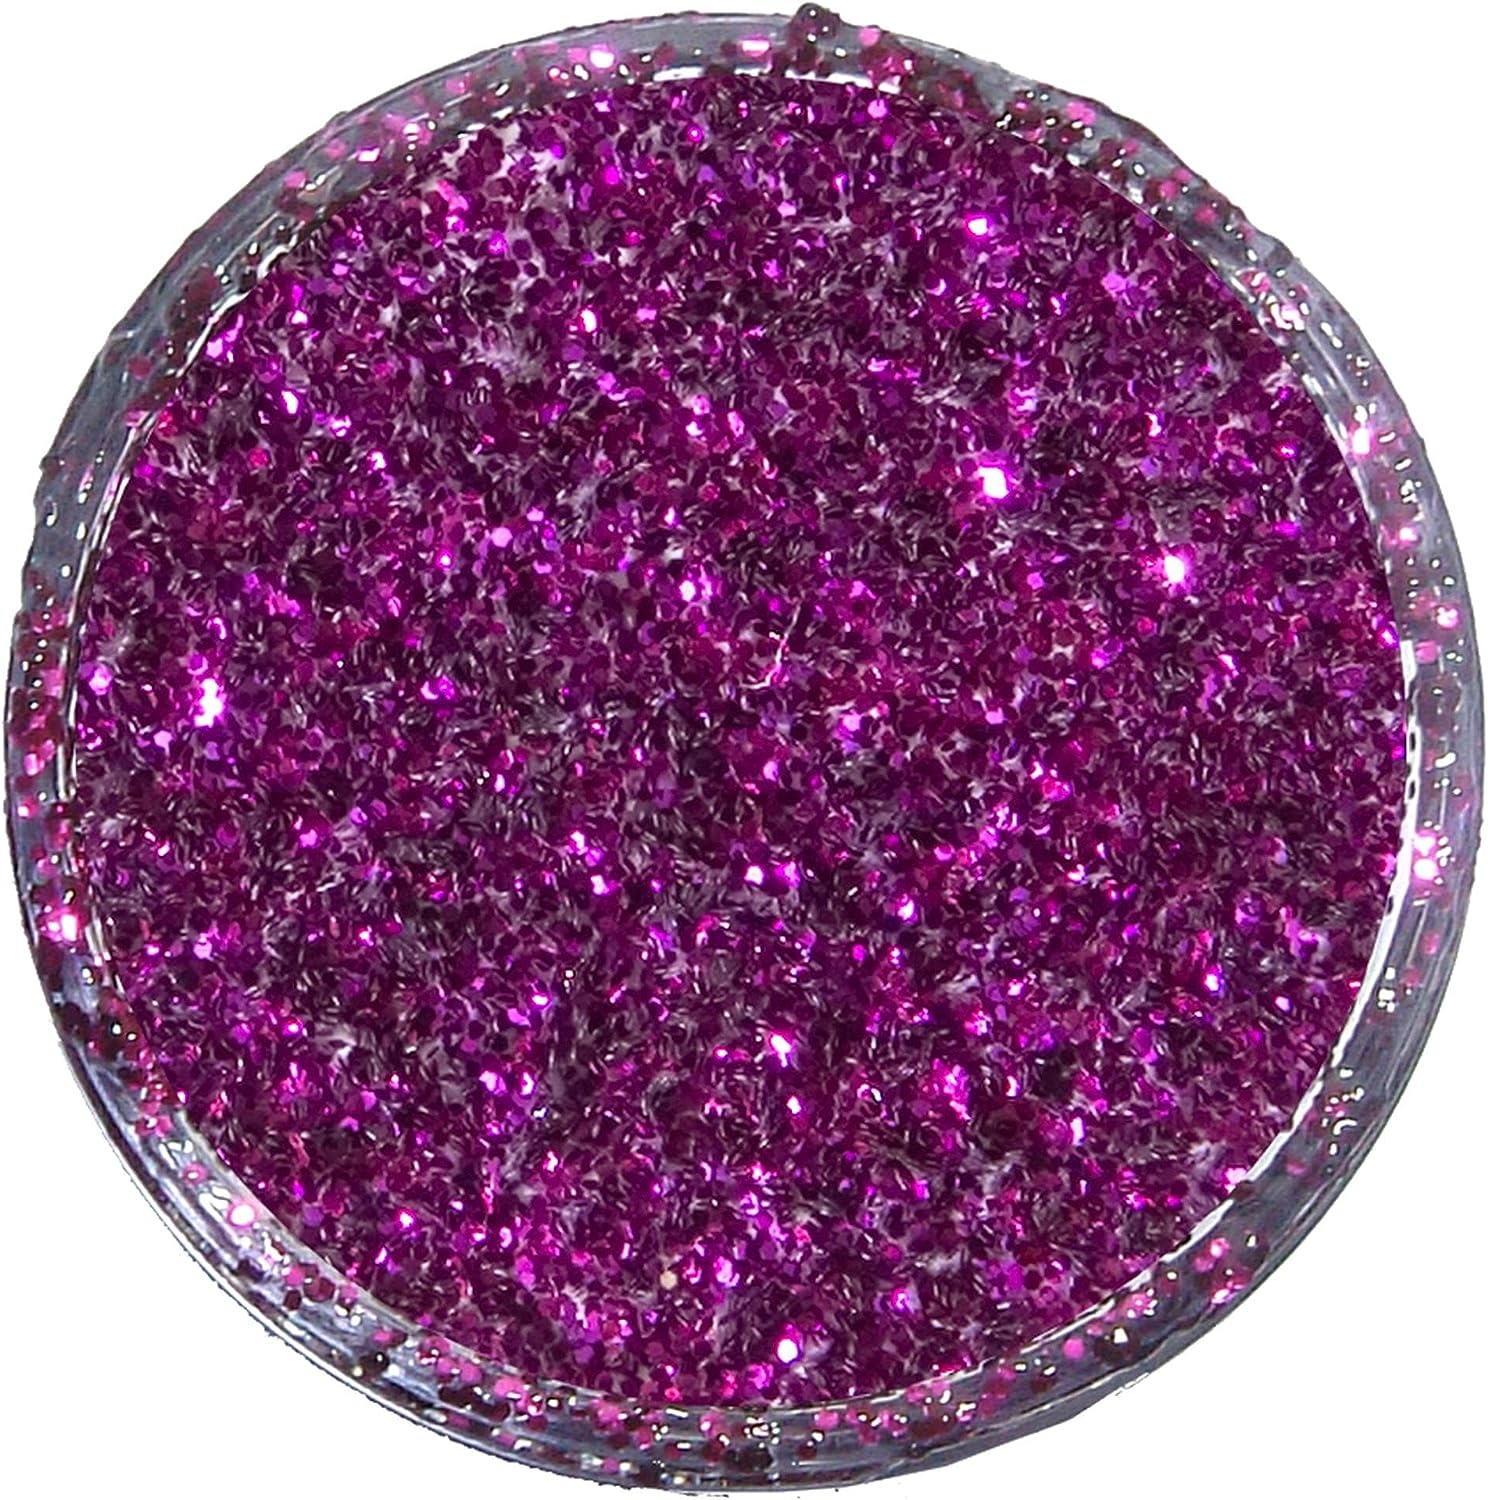 Snazaroo Glitter Dust, Multicolor   price checker   price checker Description Gallery Reviews Variations Additional details